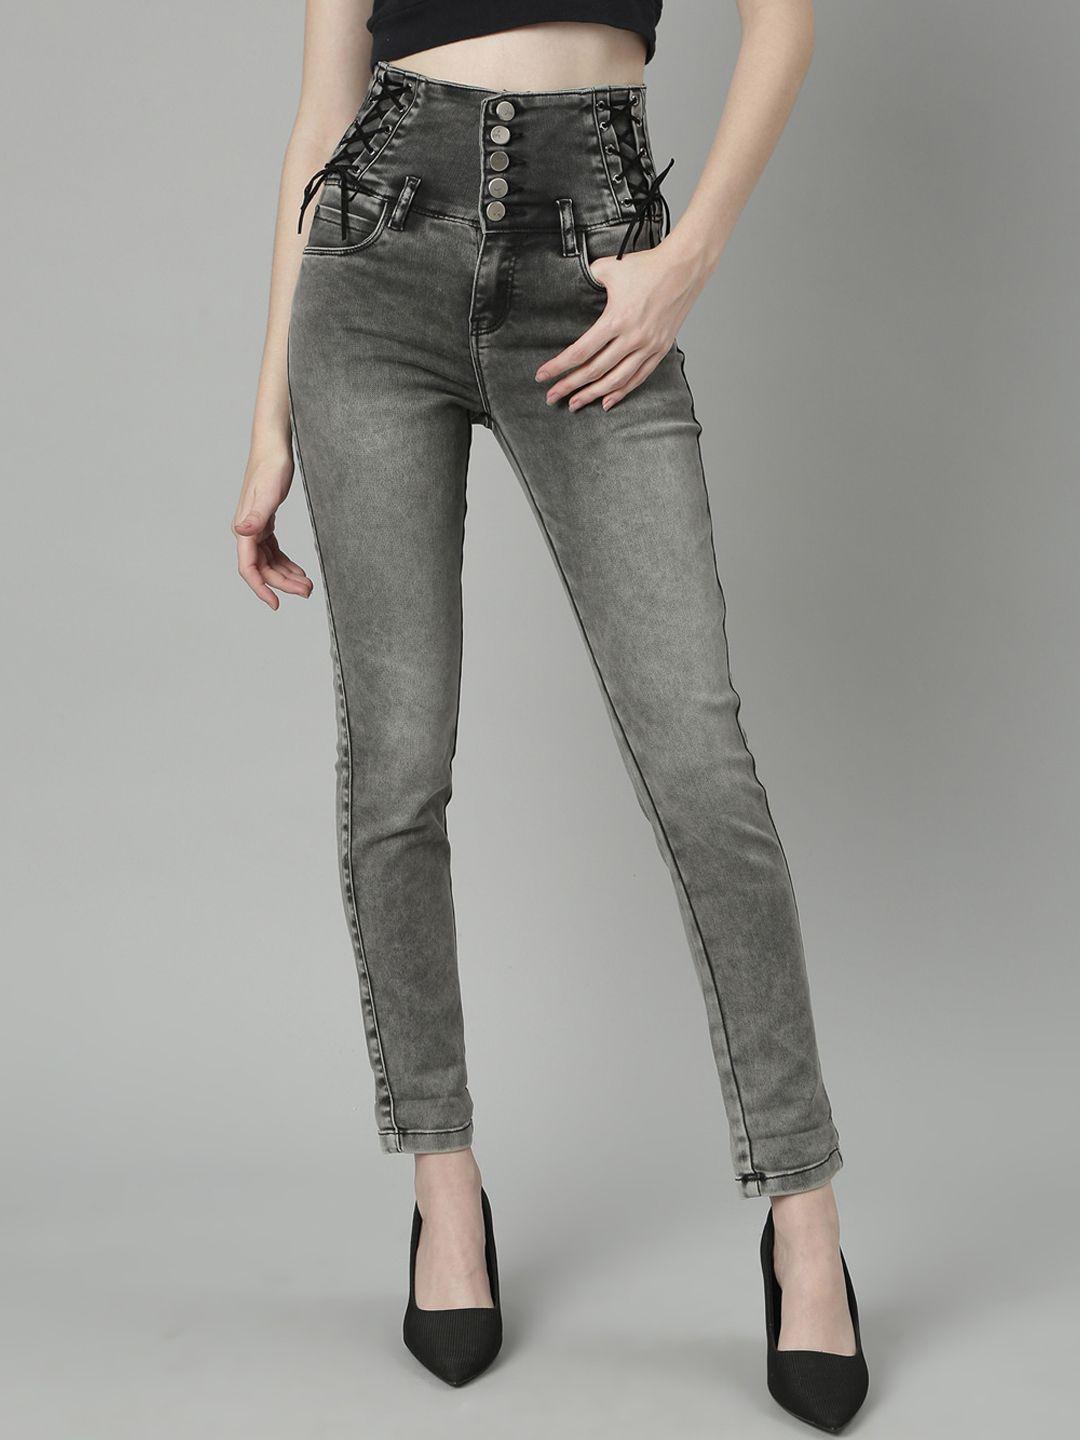 showoff women jean slim fit heavy fade clean look mid-rise acid wash stretchable jeans